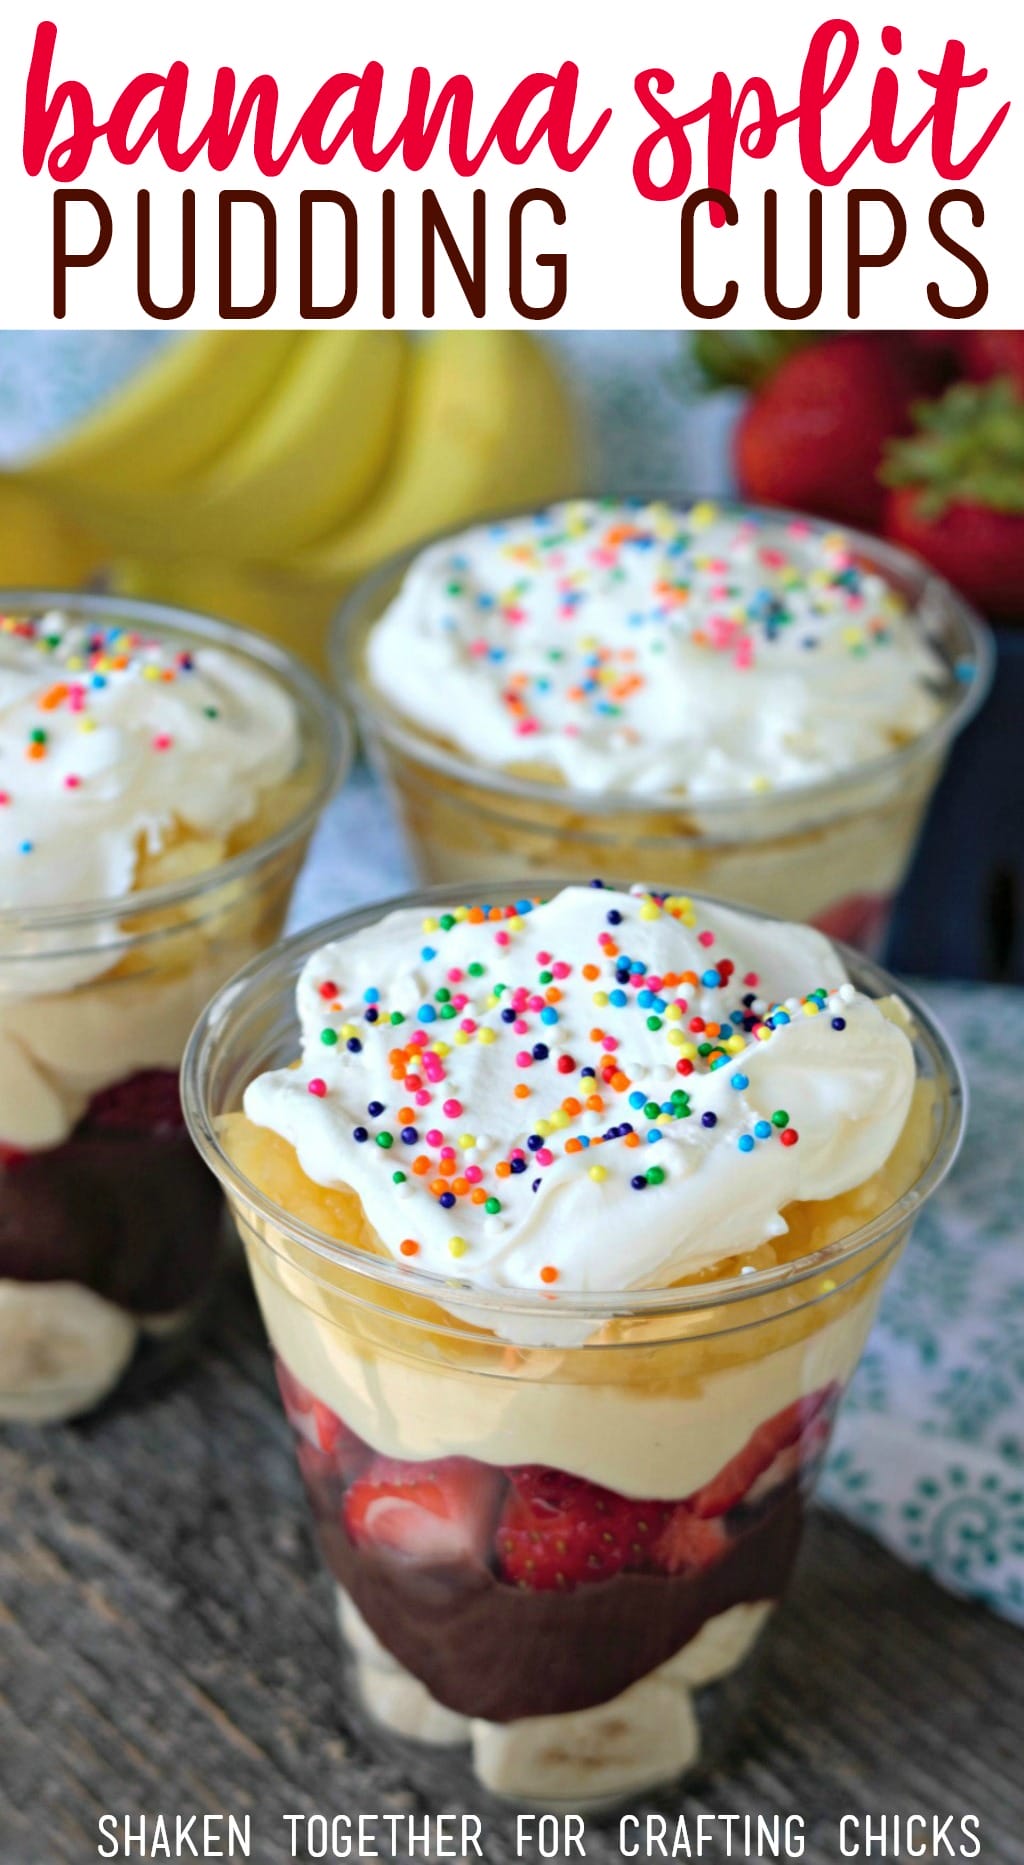 Banana Split Pudding Cups are an easy no bake dessert with all of the classic flavors of a banana split!